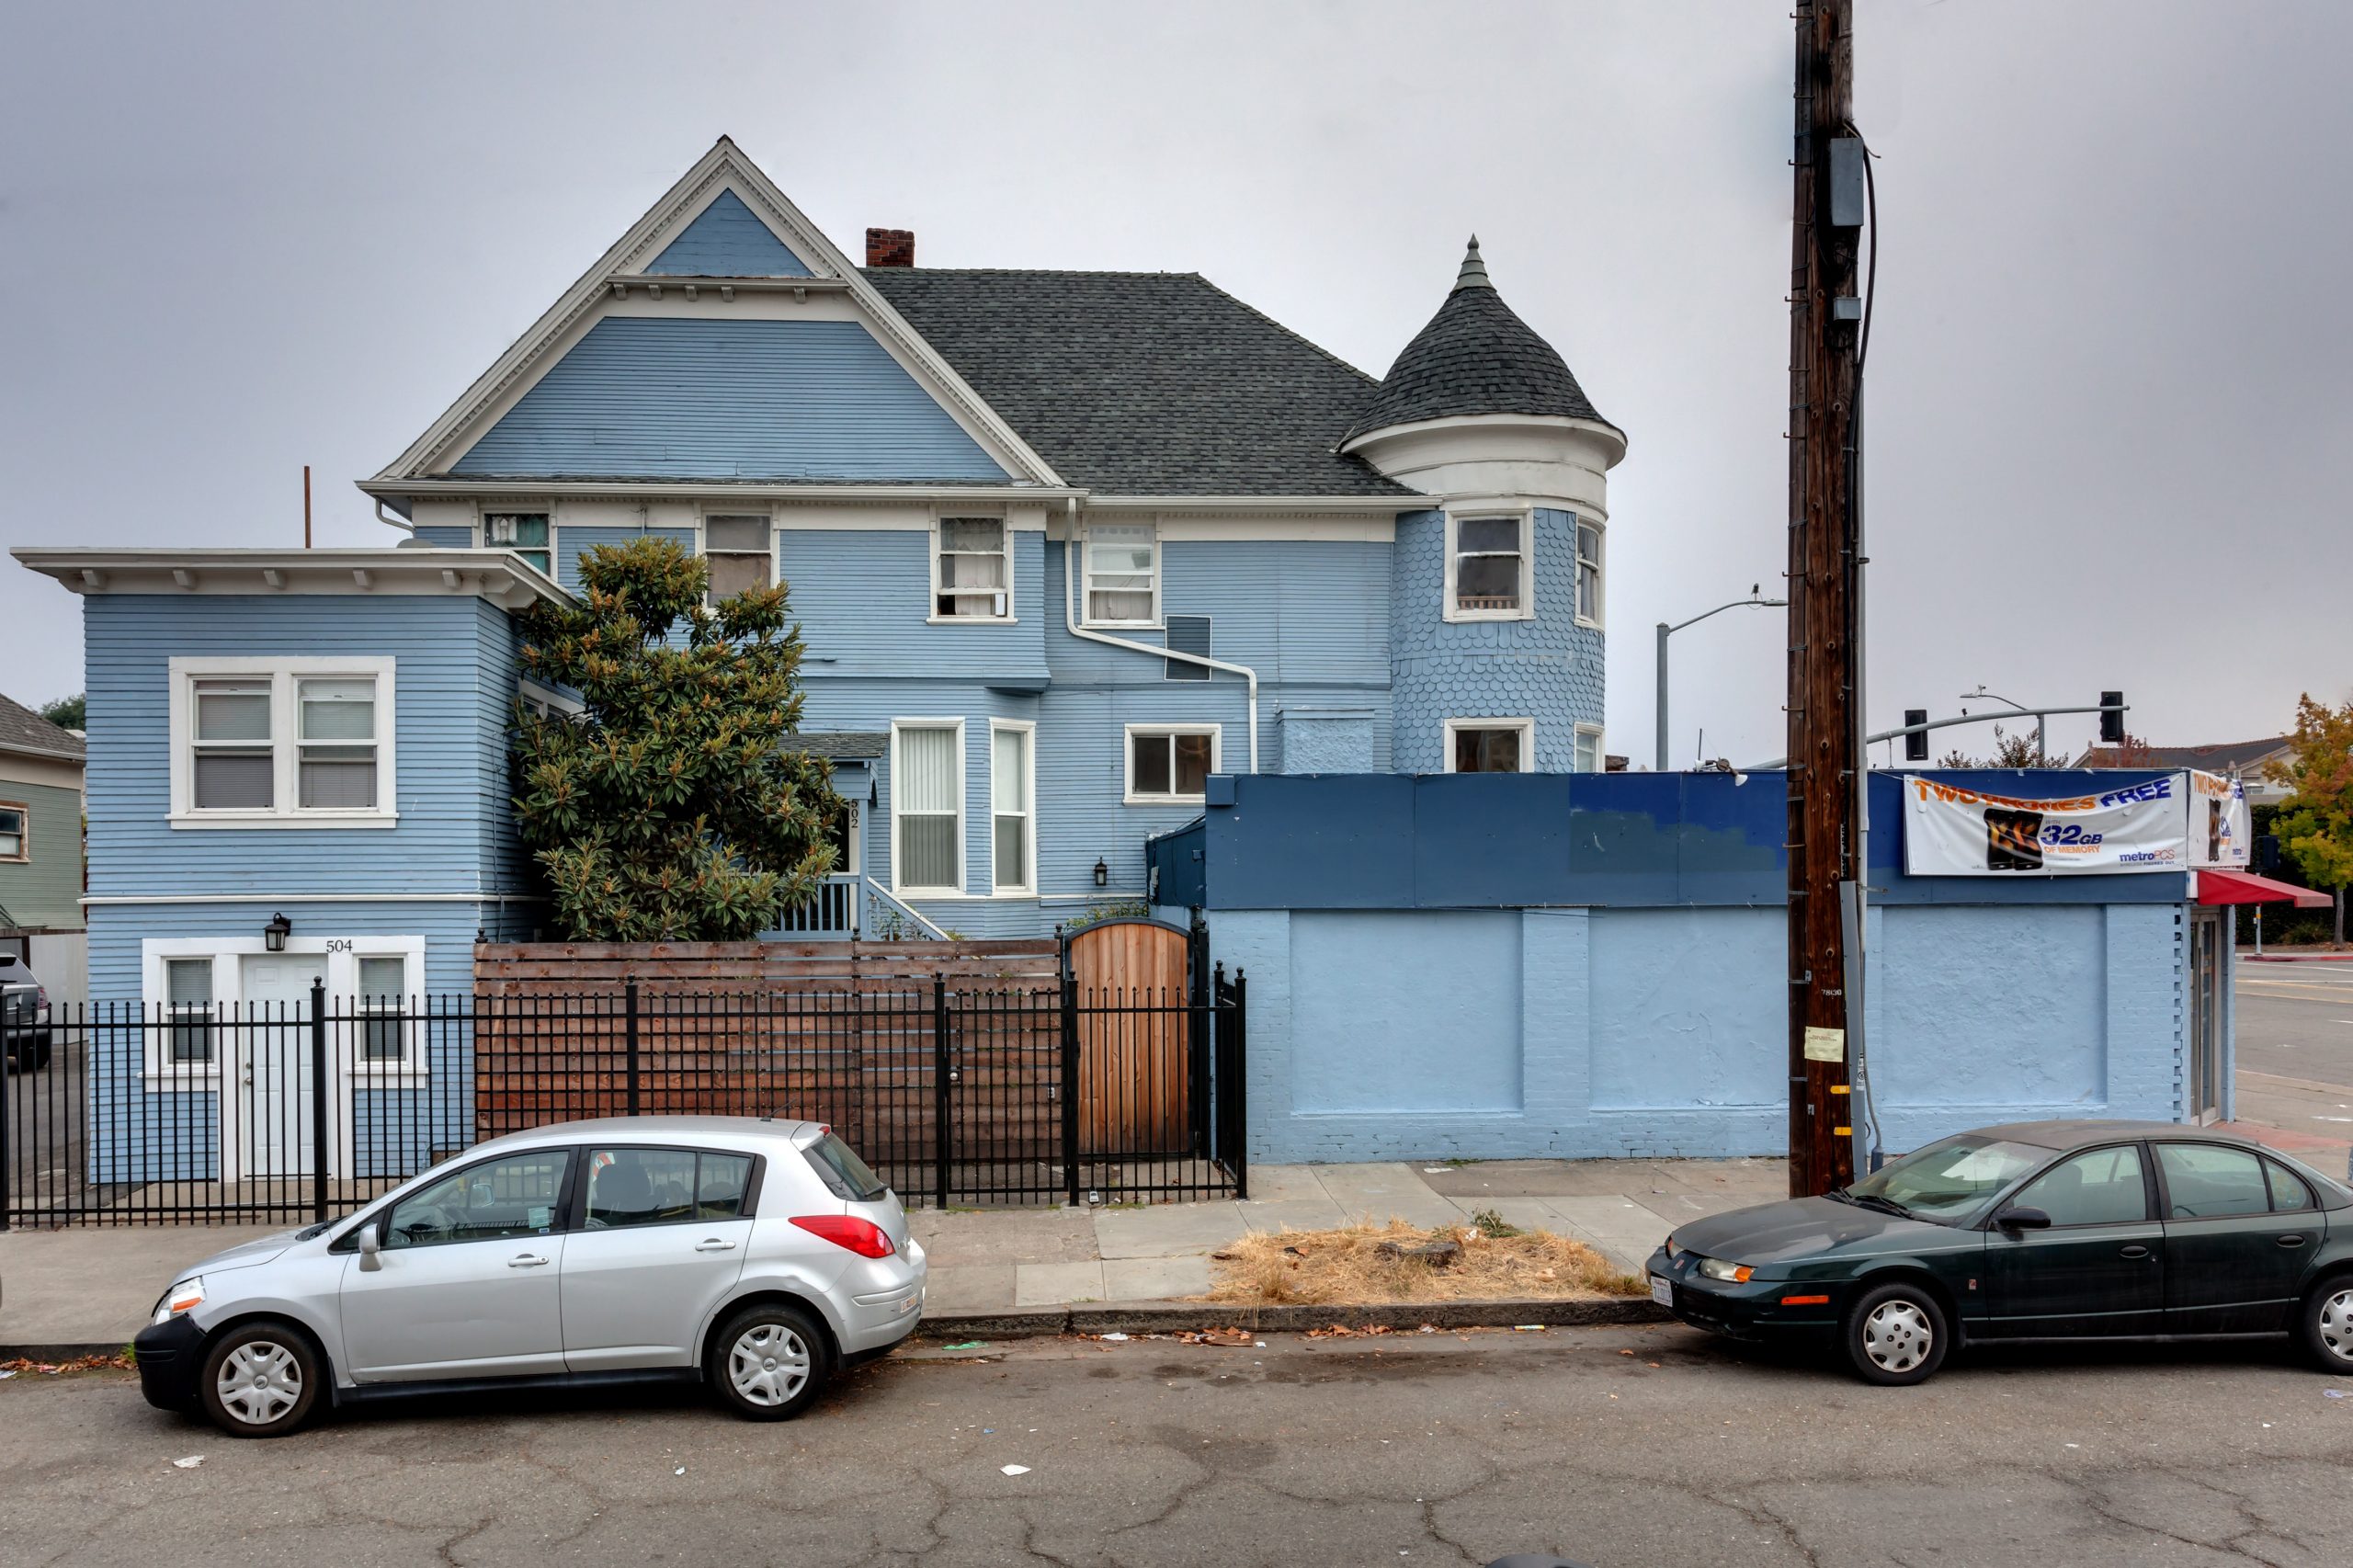 Blue-semi-Victorian-apartments-with-black-fence